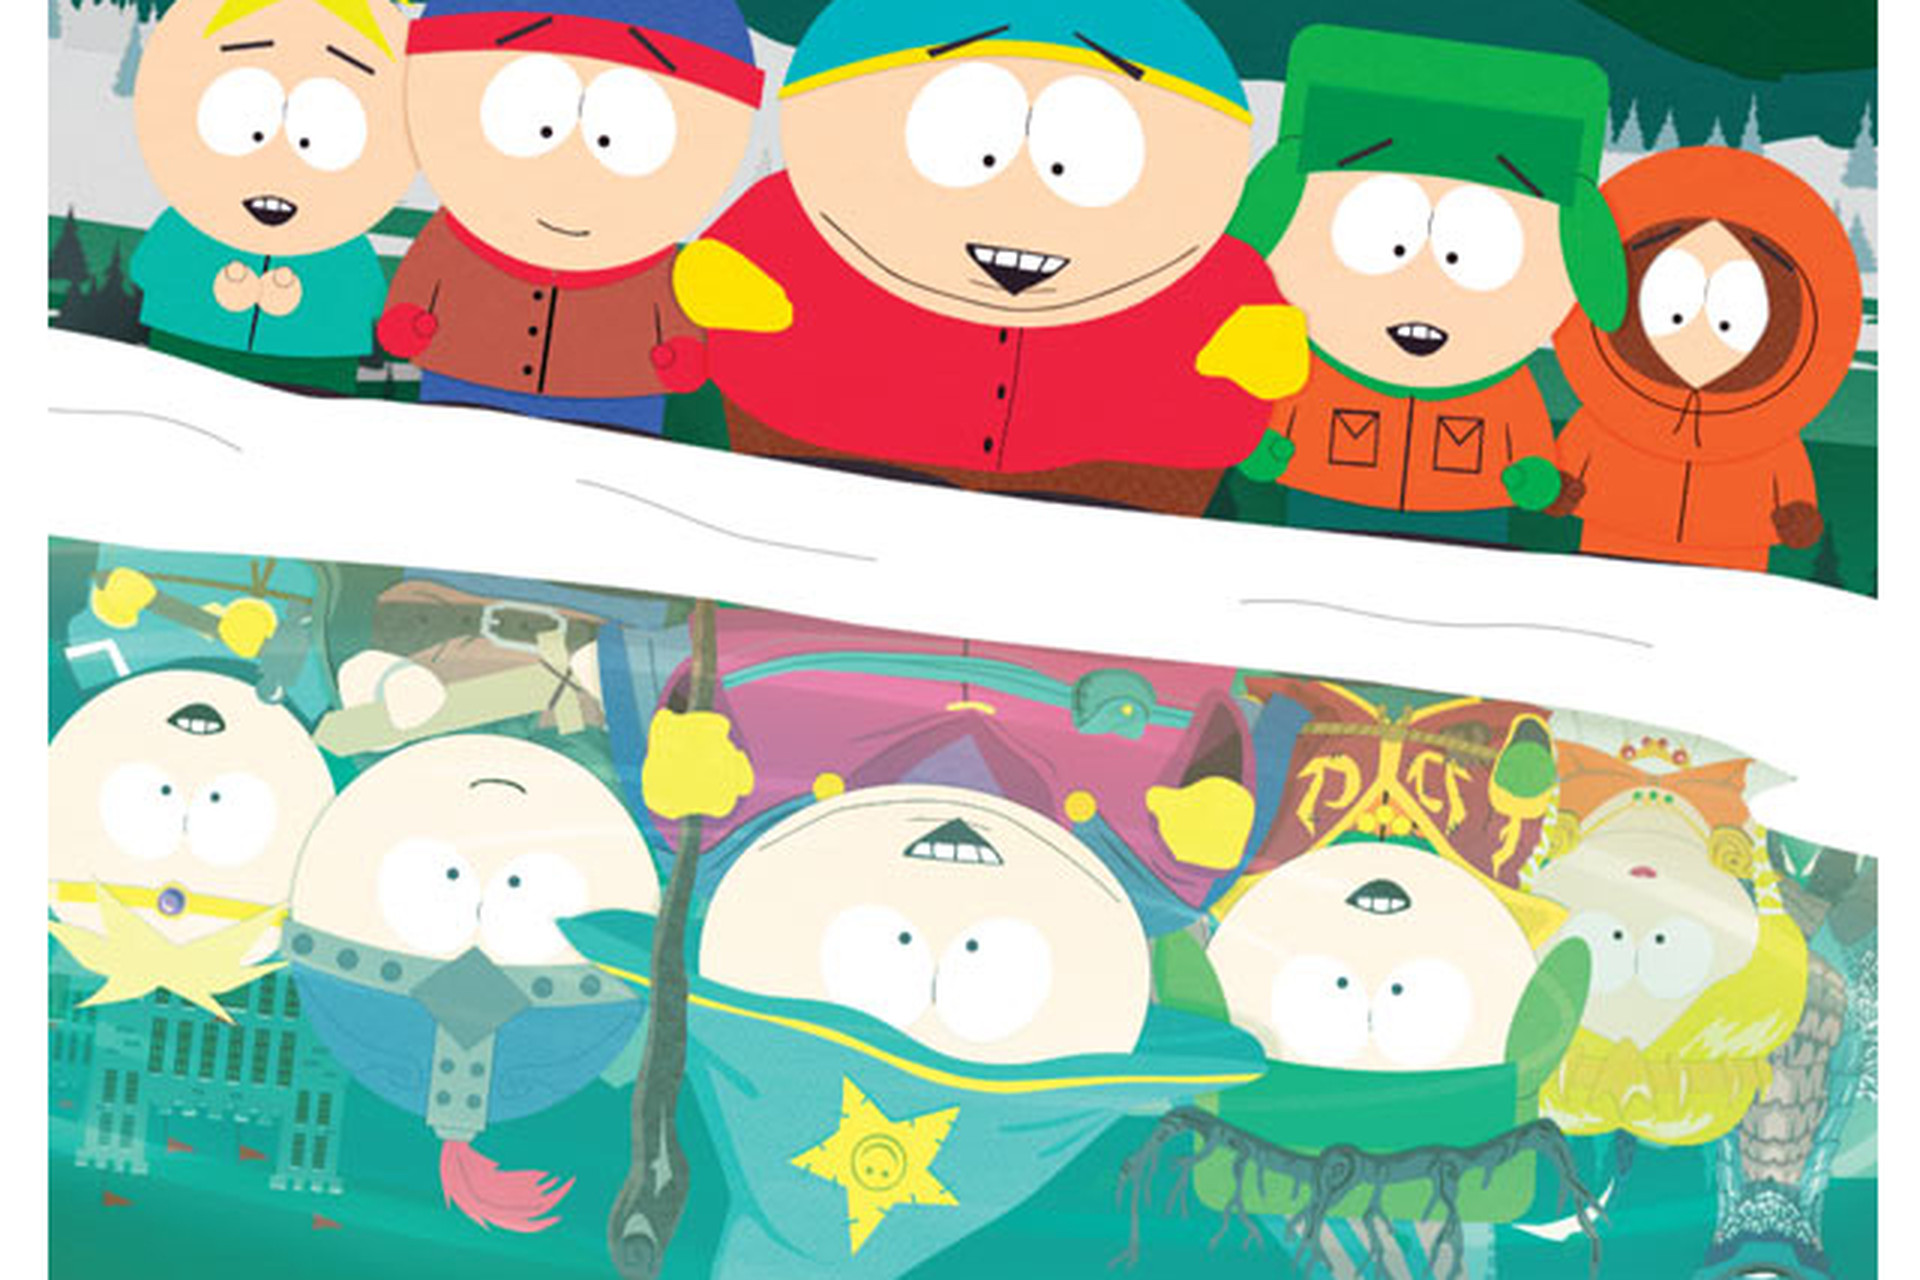 Hulu now has exclusive rights to stream every episode of 'South Park